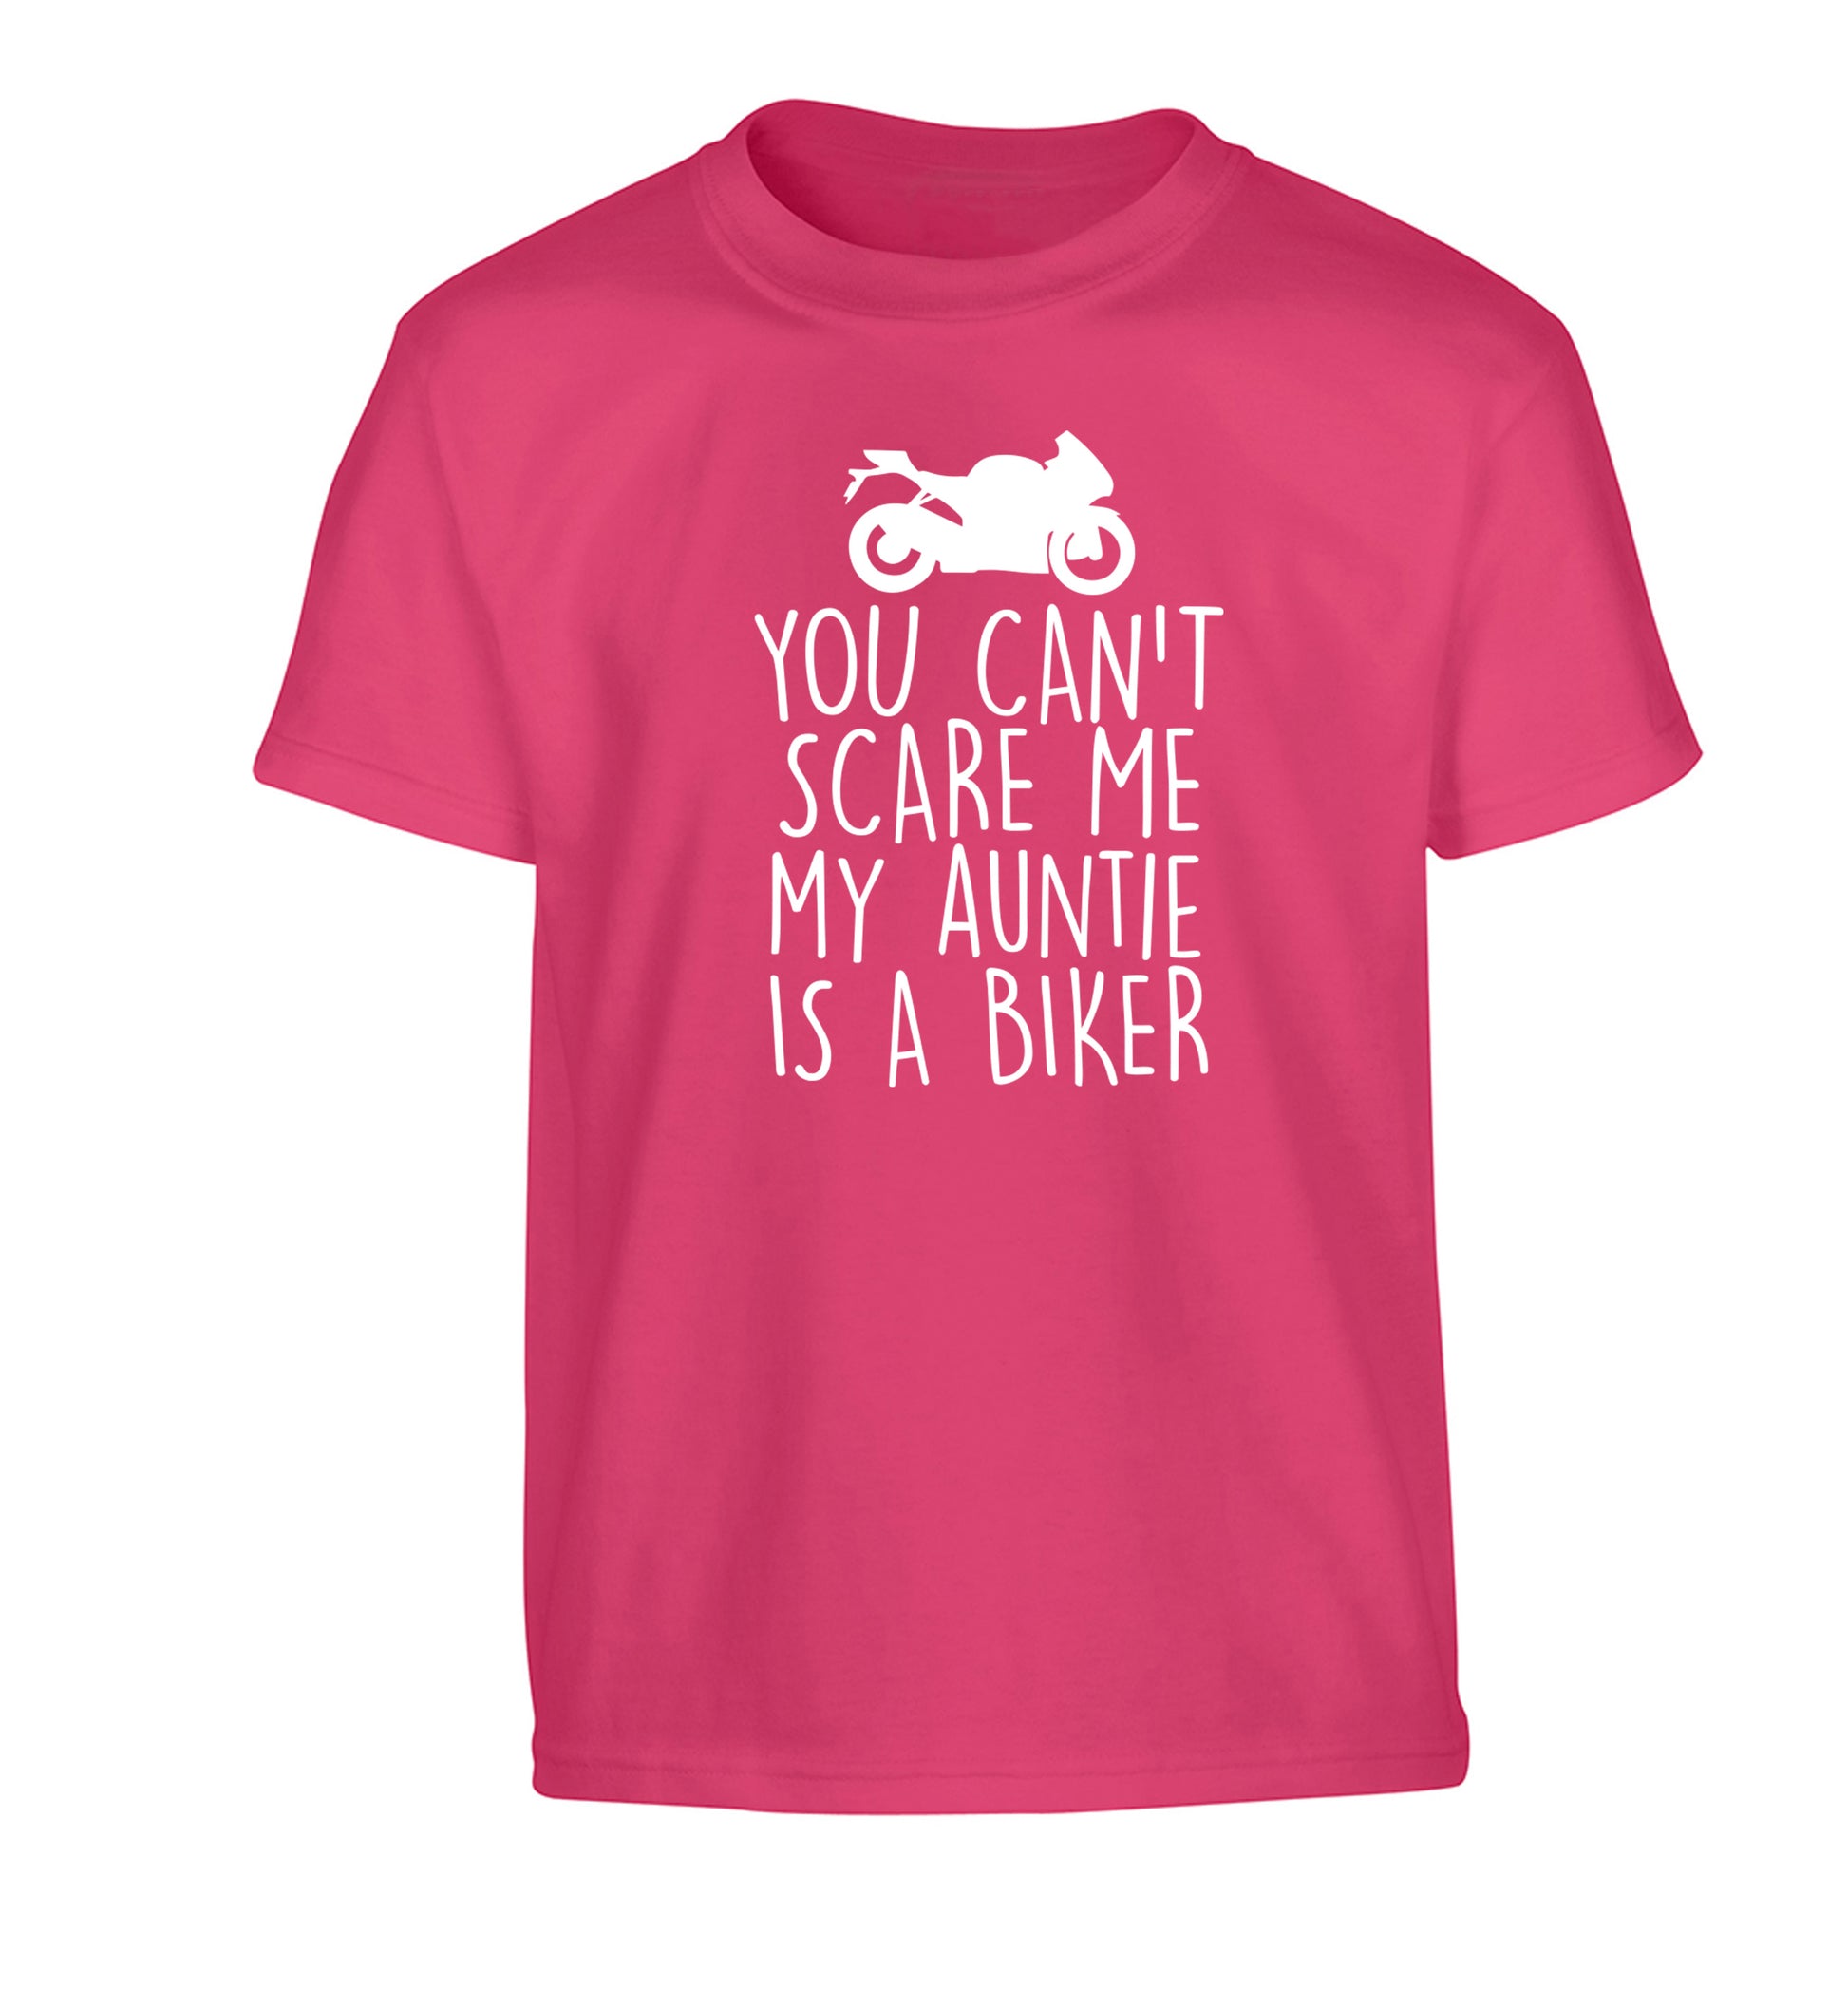 You can't scare me my auntie is a biker Children's pink Tshirt 12-13 Years